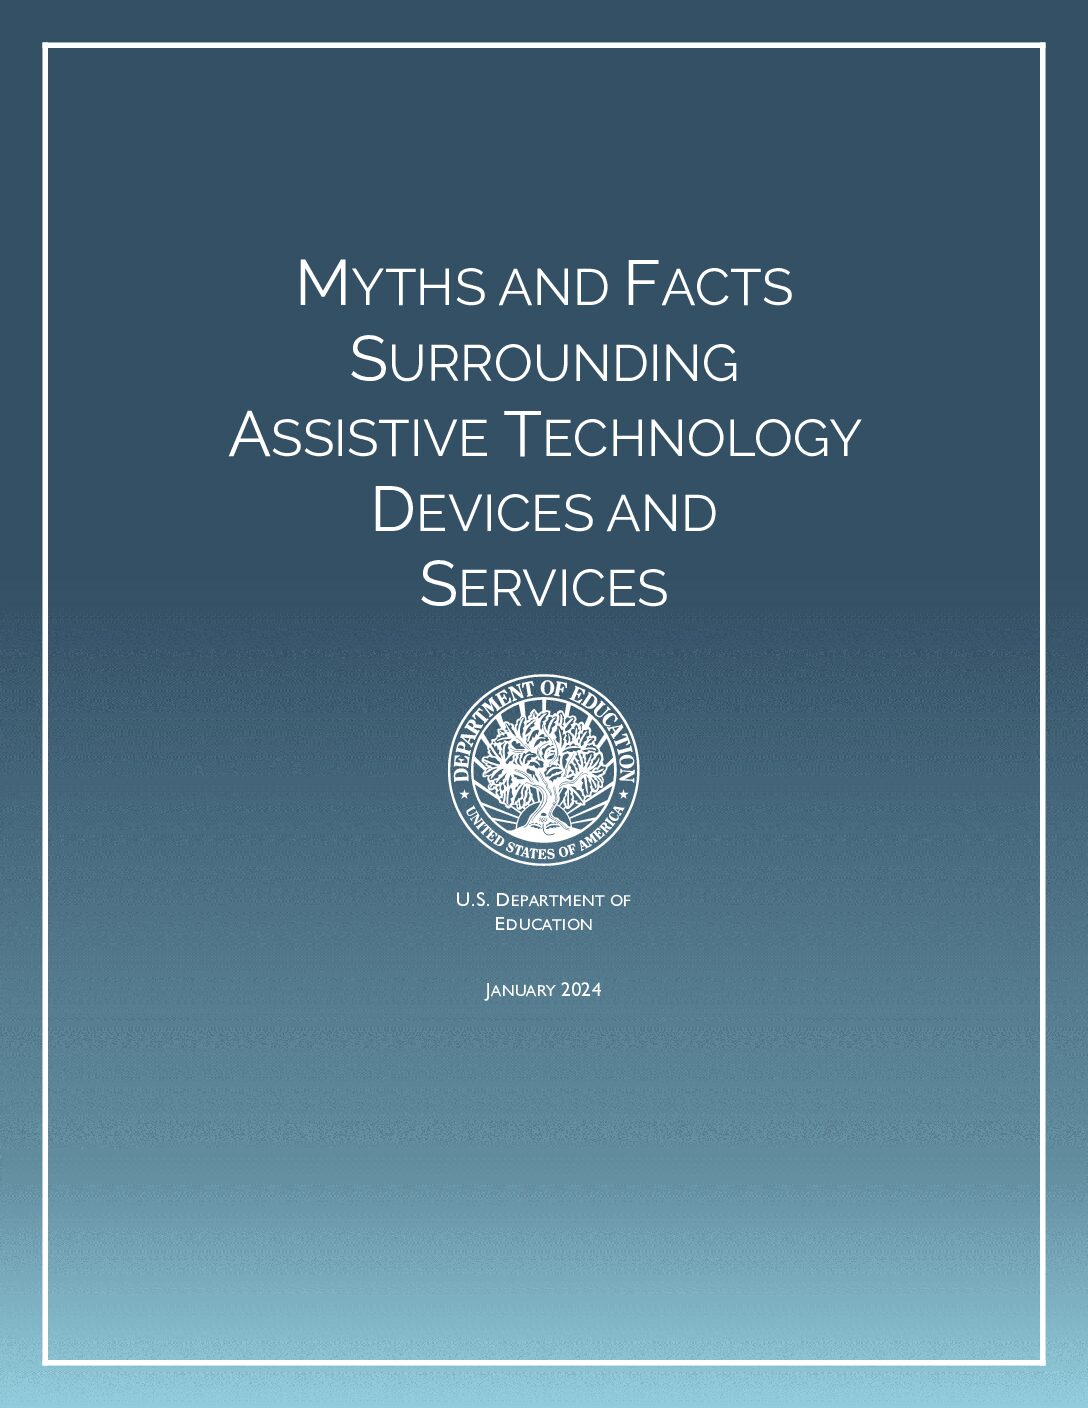 Myths and Facts - Assistive Technology